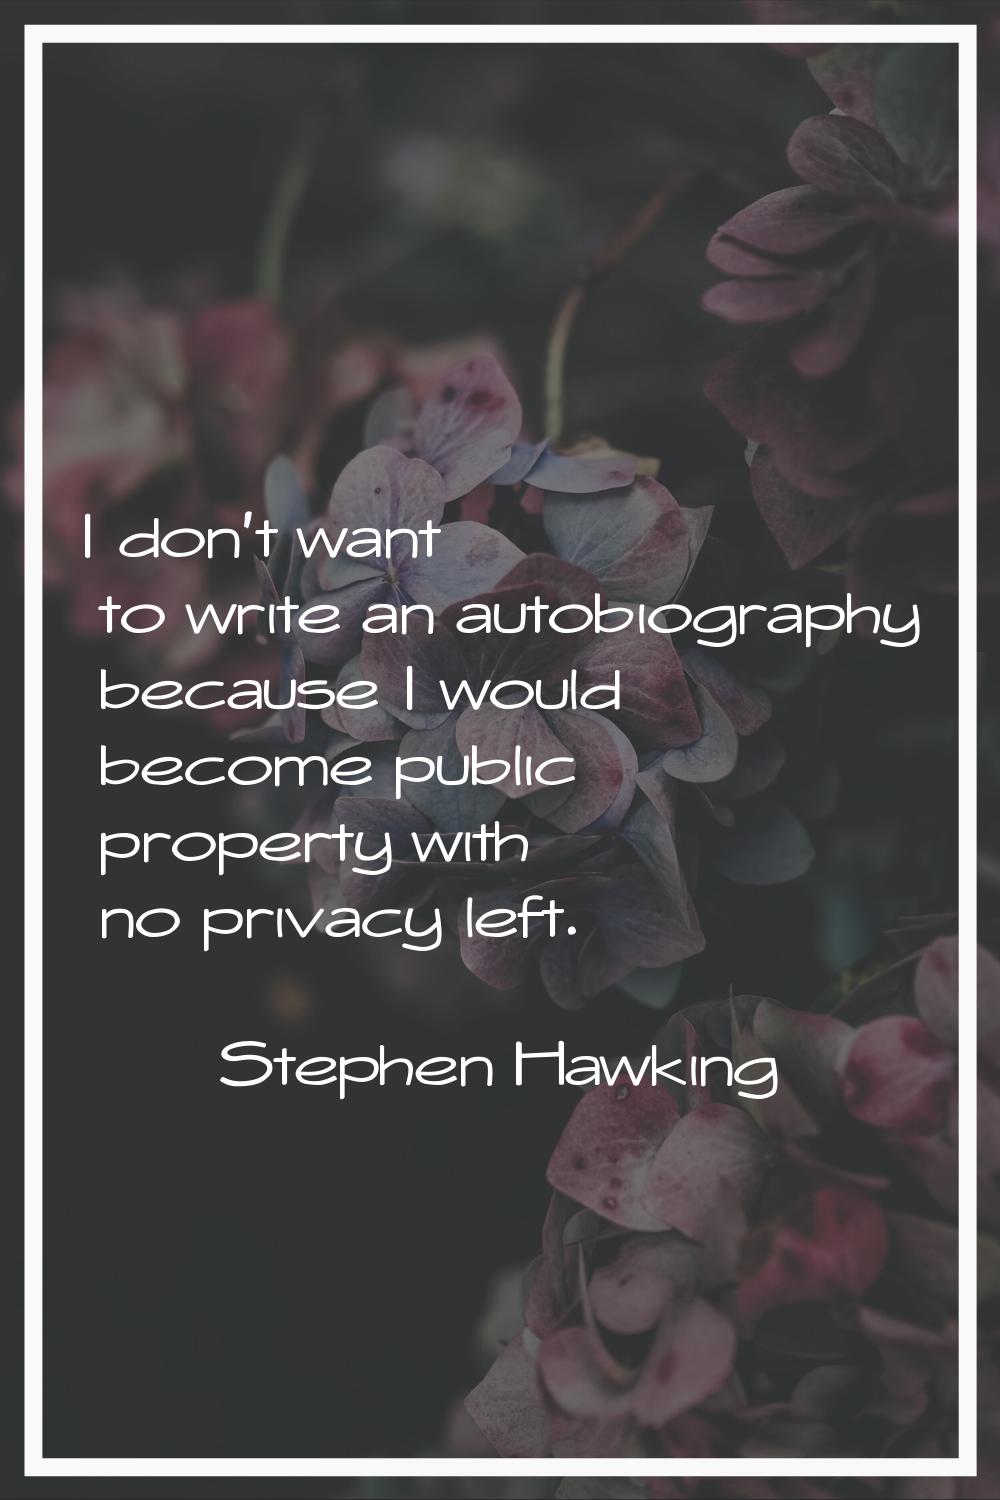 I don't want to write an autobiography because I would become public property with no privacy left.